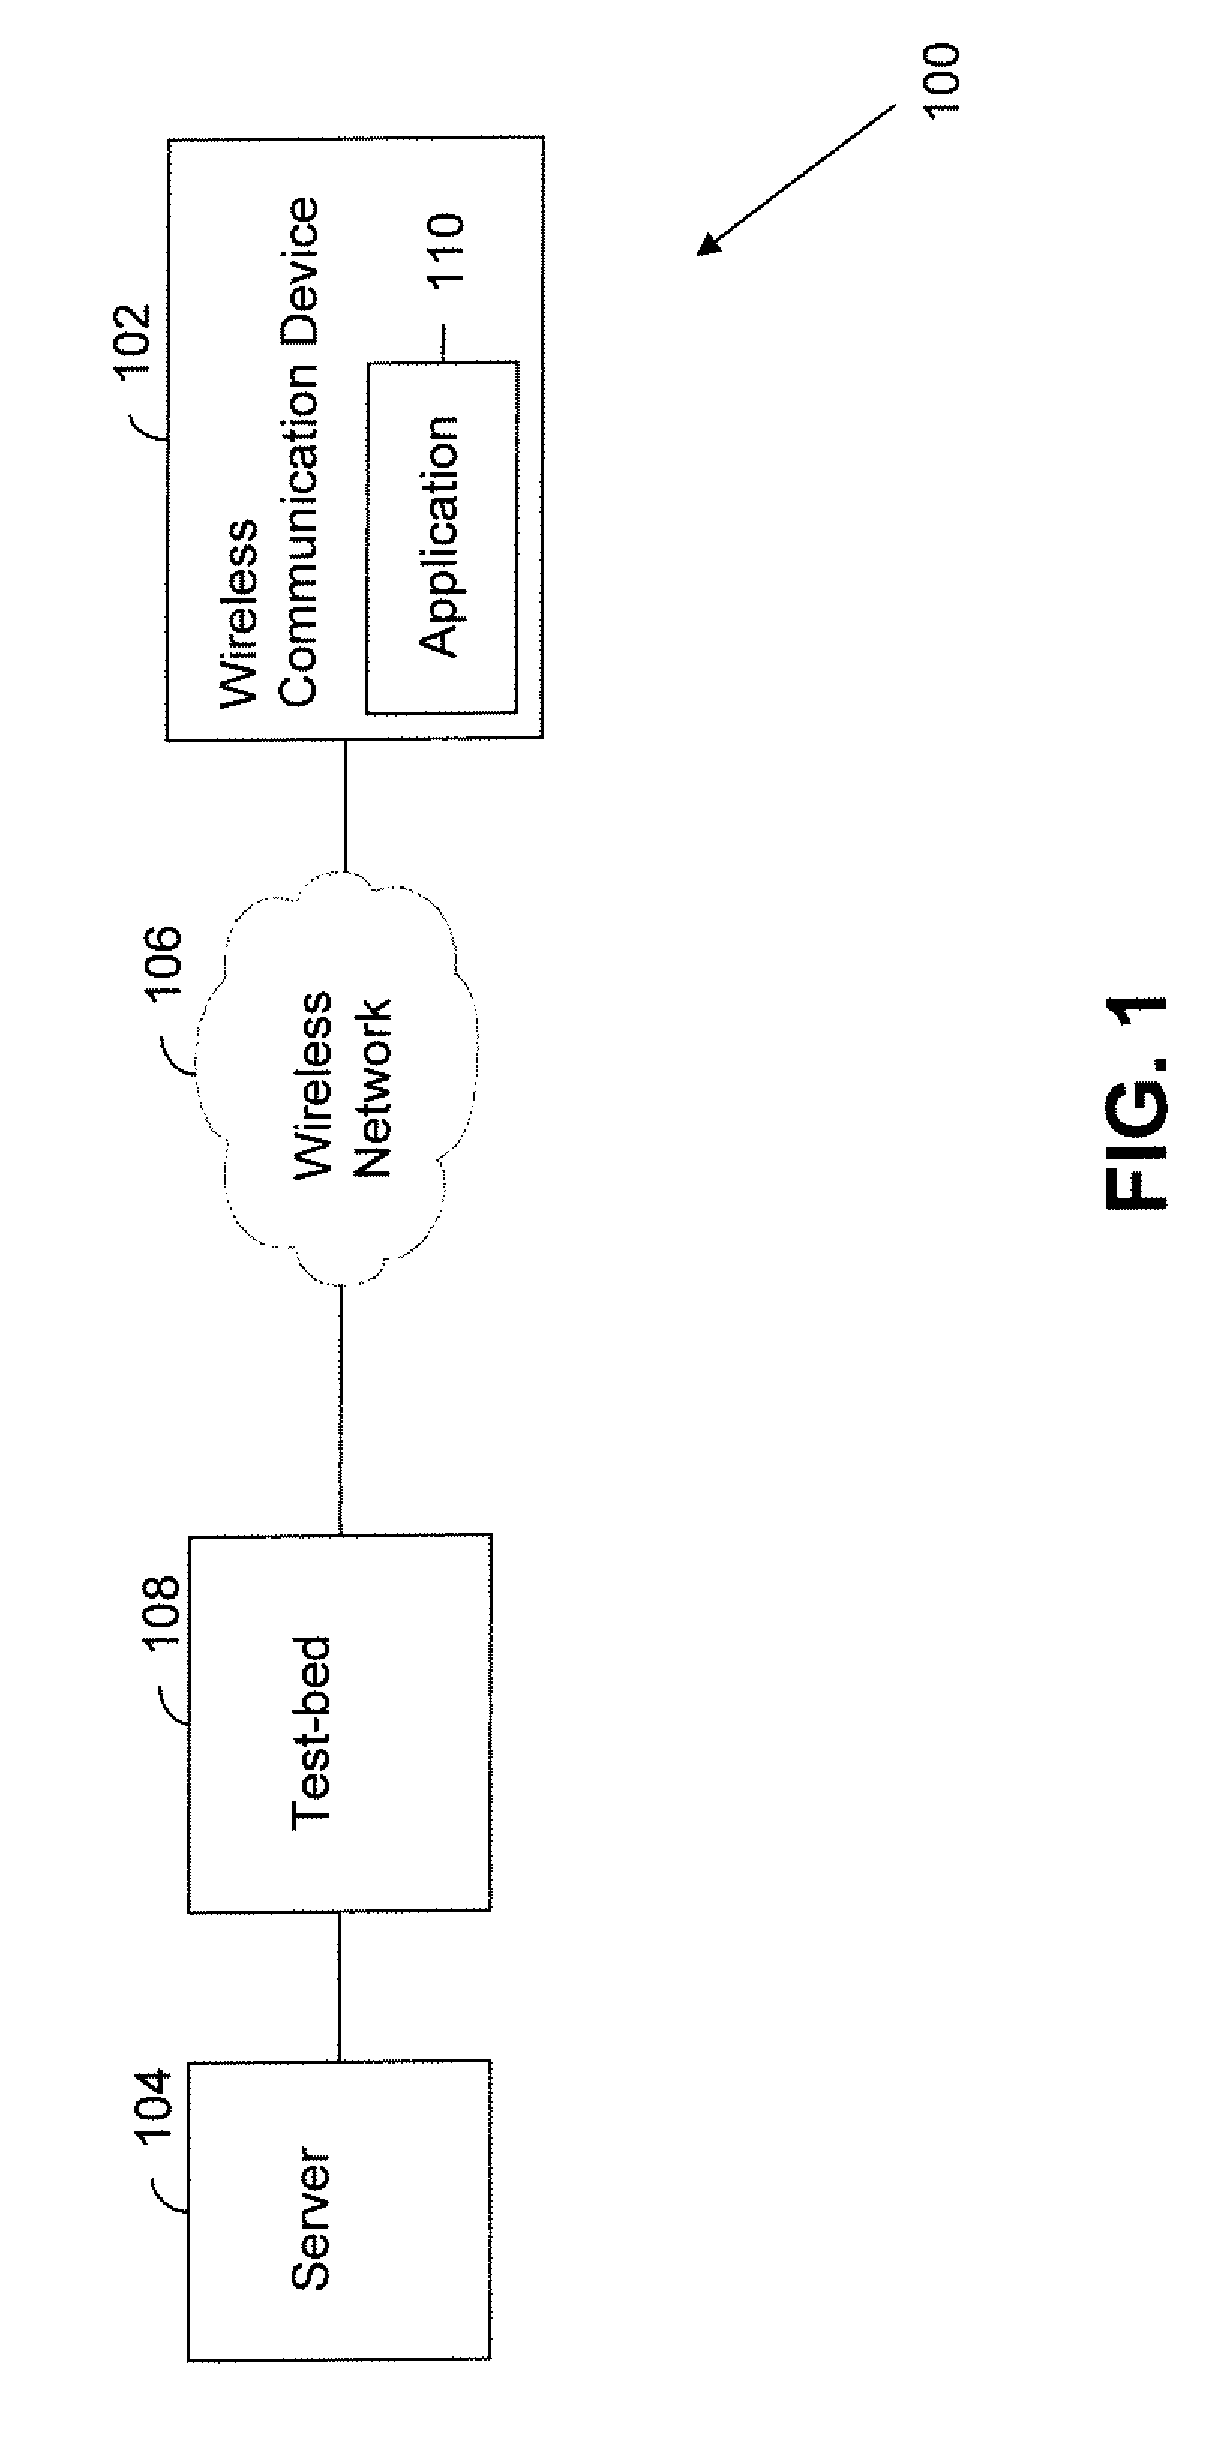 System and method for testing an application installed on a wireless communication device